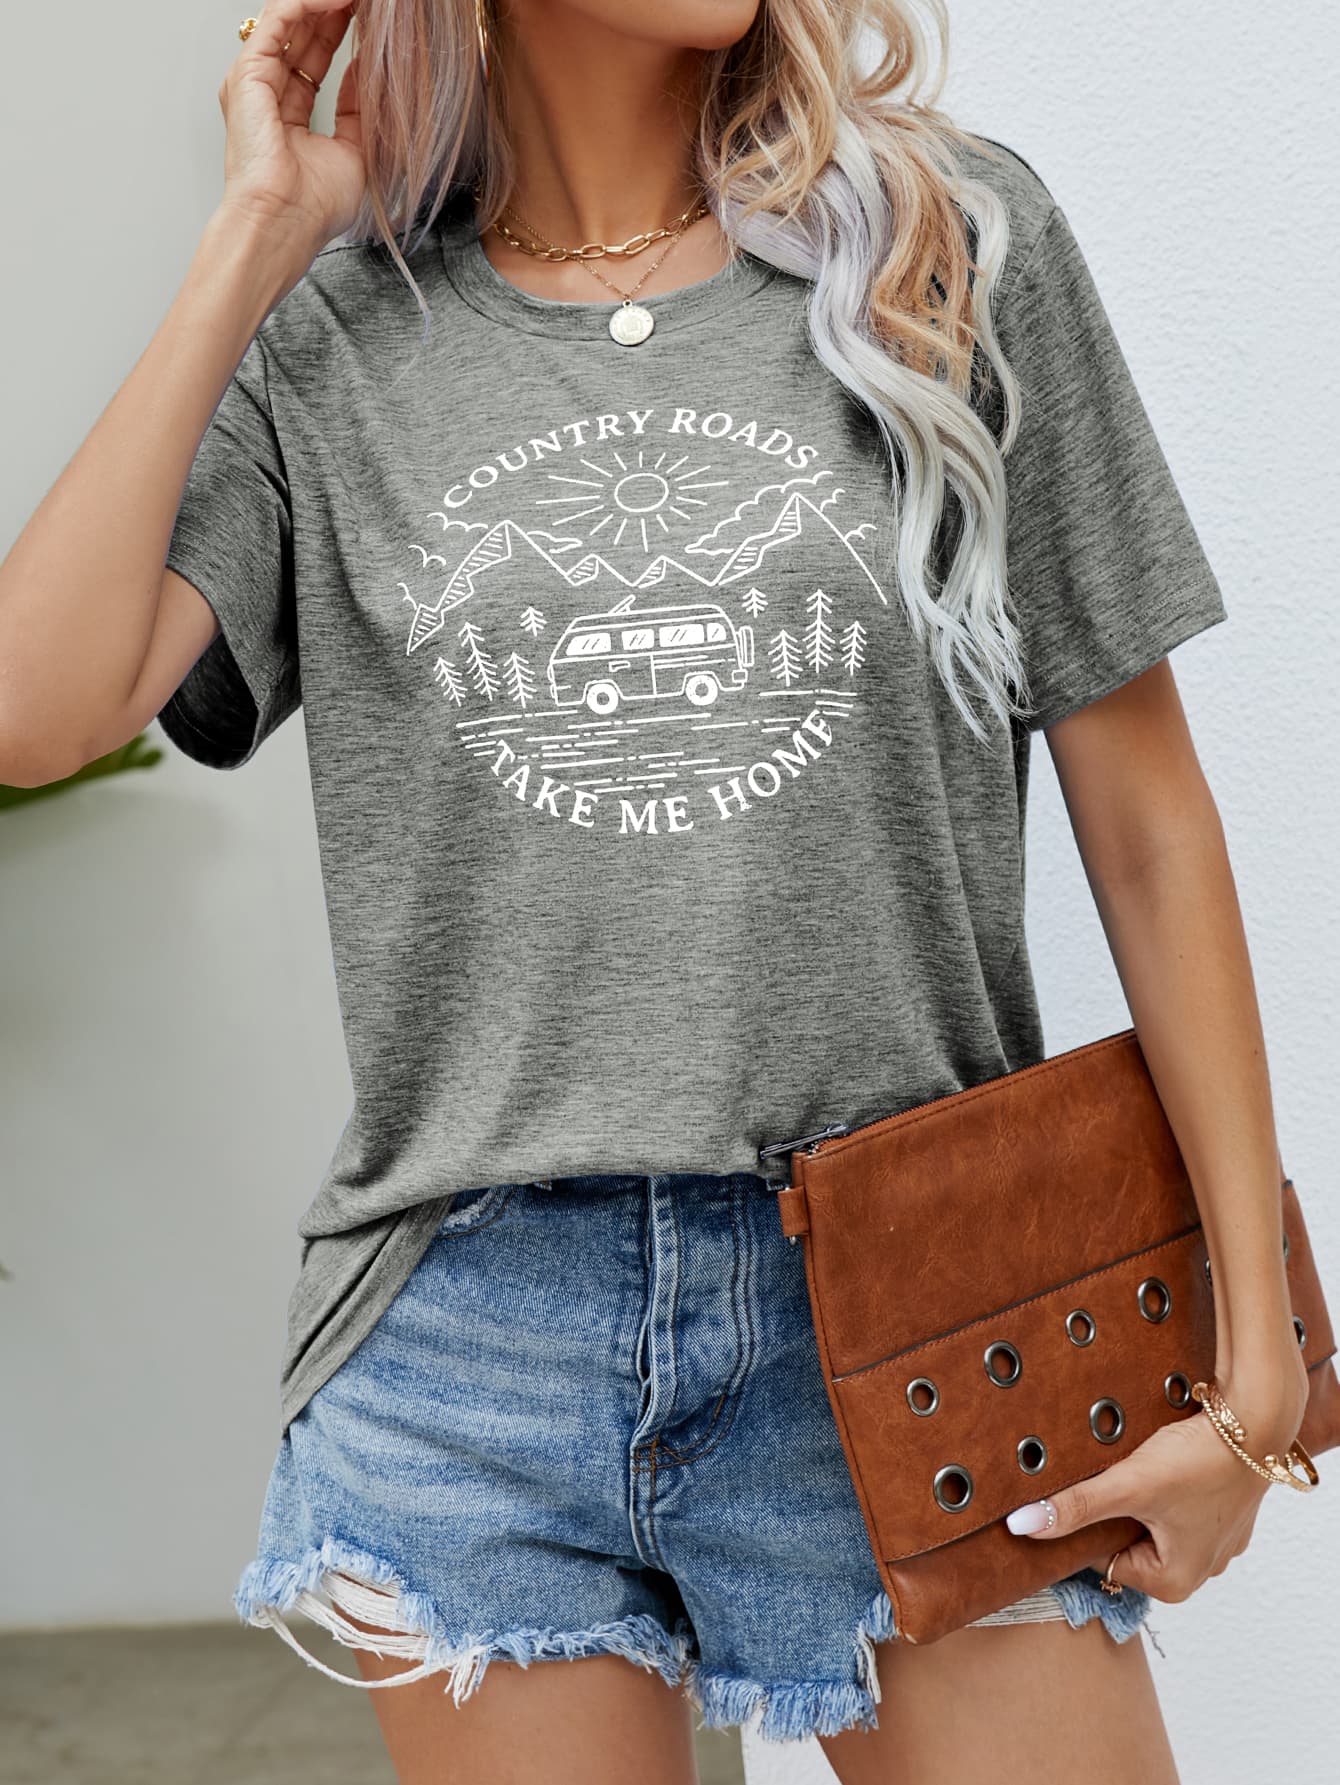 COUNTRY ROADS TAKE ME HOME Graphic Tee (5 Colors)  Krazy Heart Designs Boutique Heather Gray S 